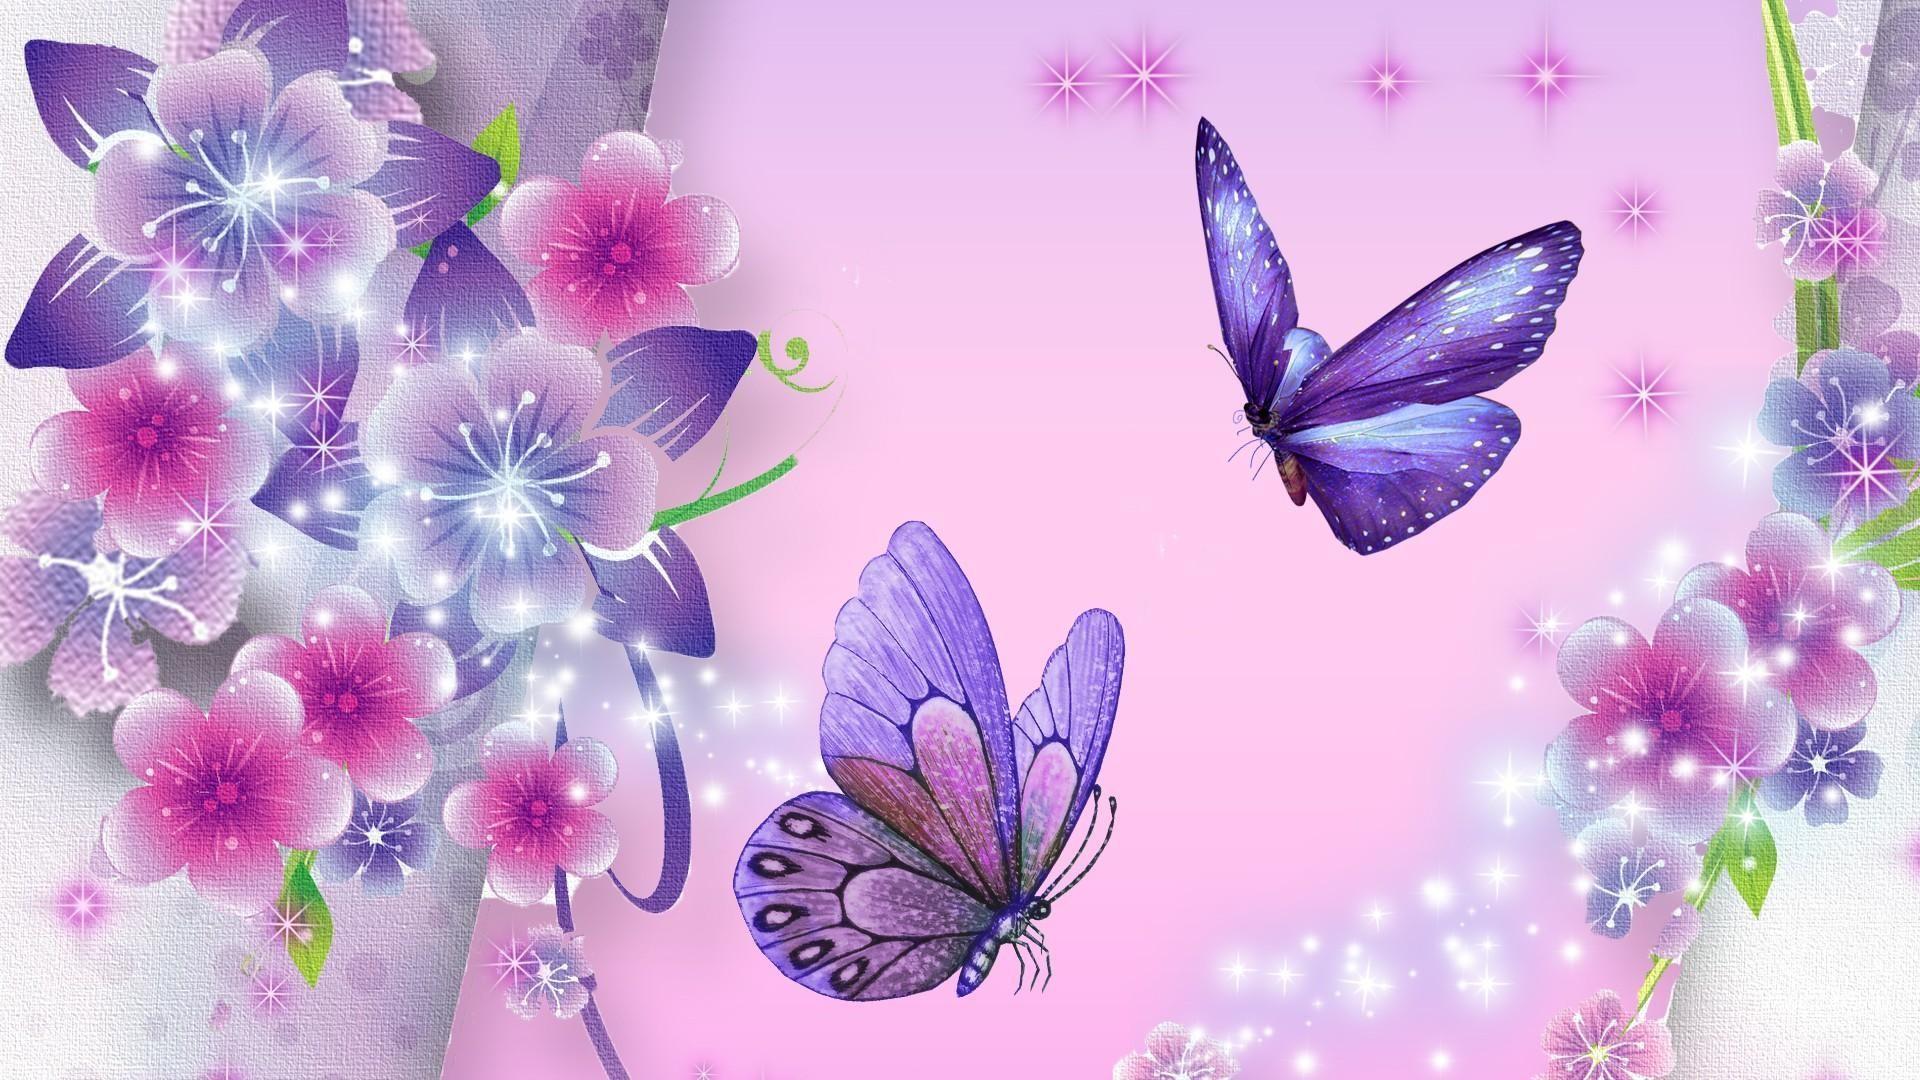 Pink Roses And Butterfly Wallpapers